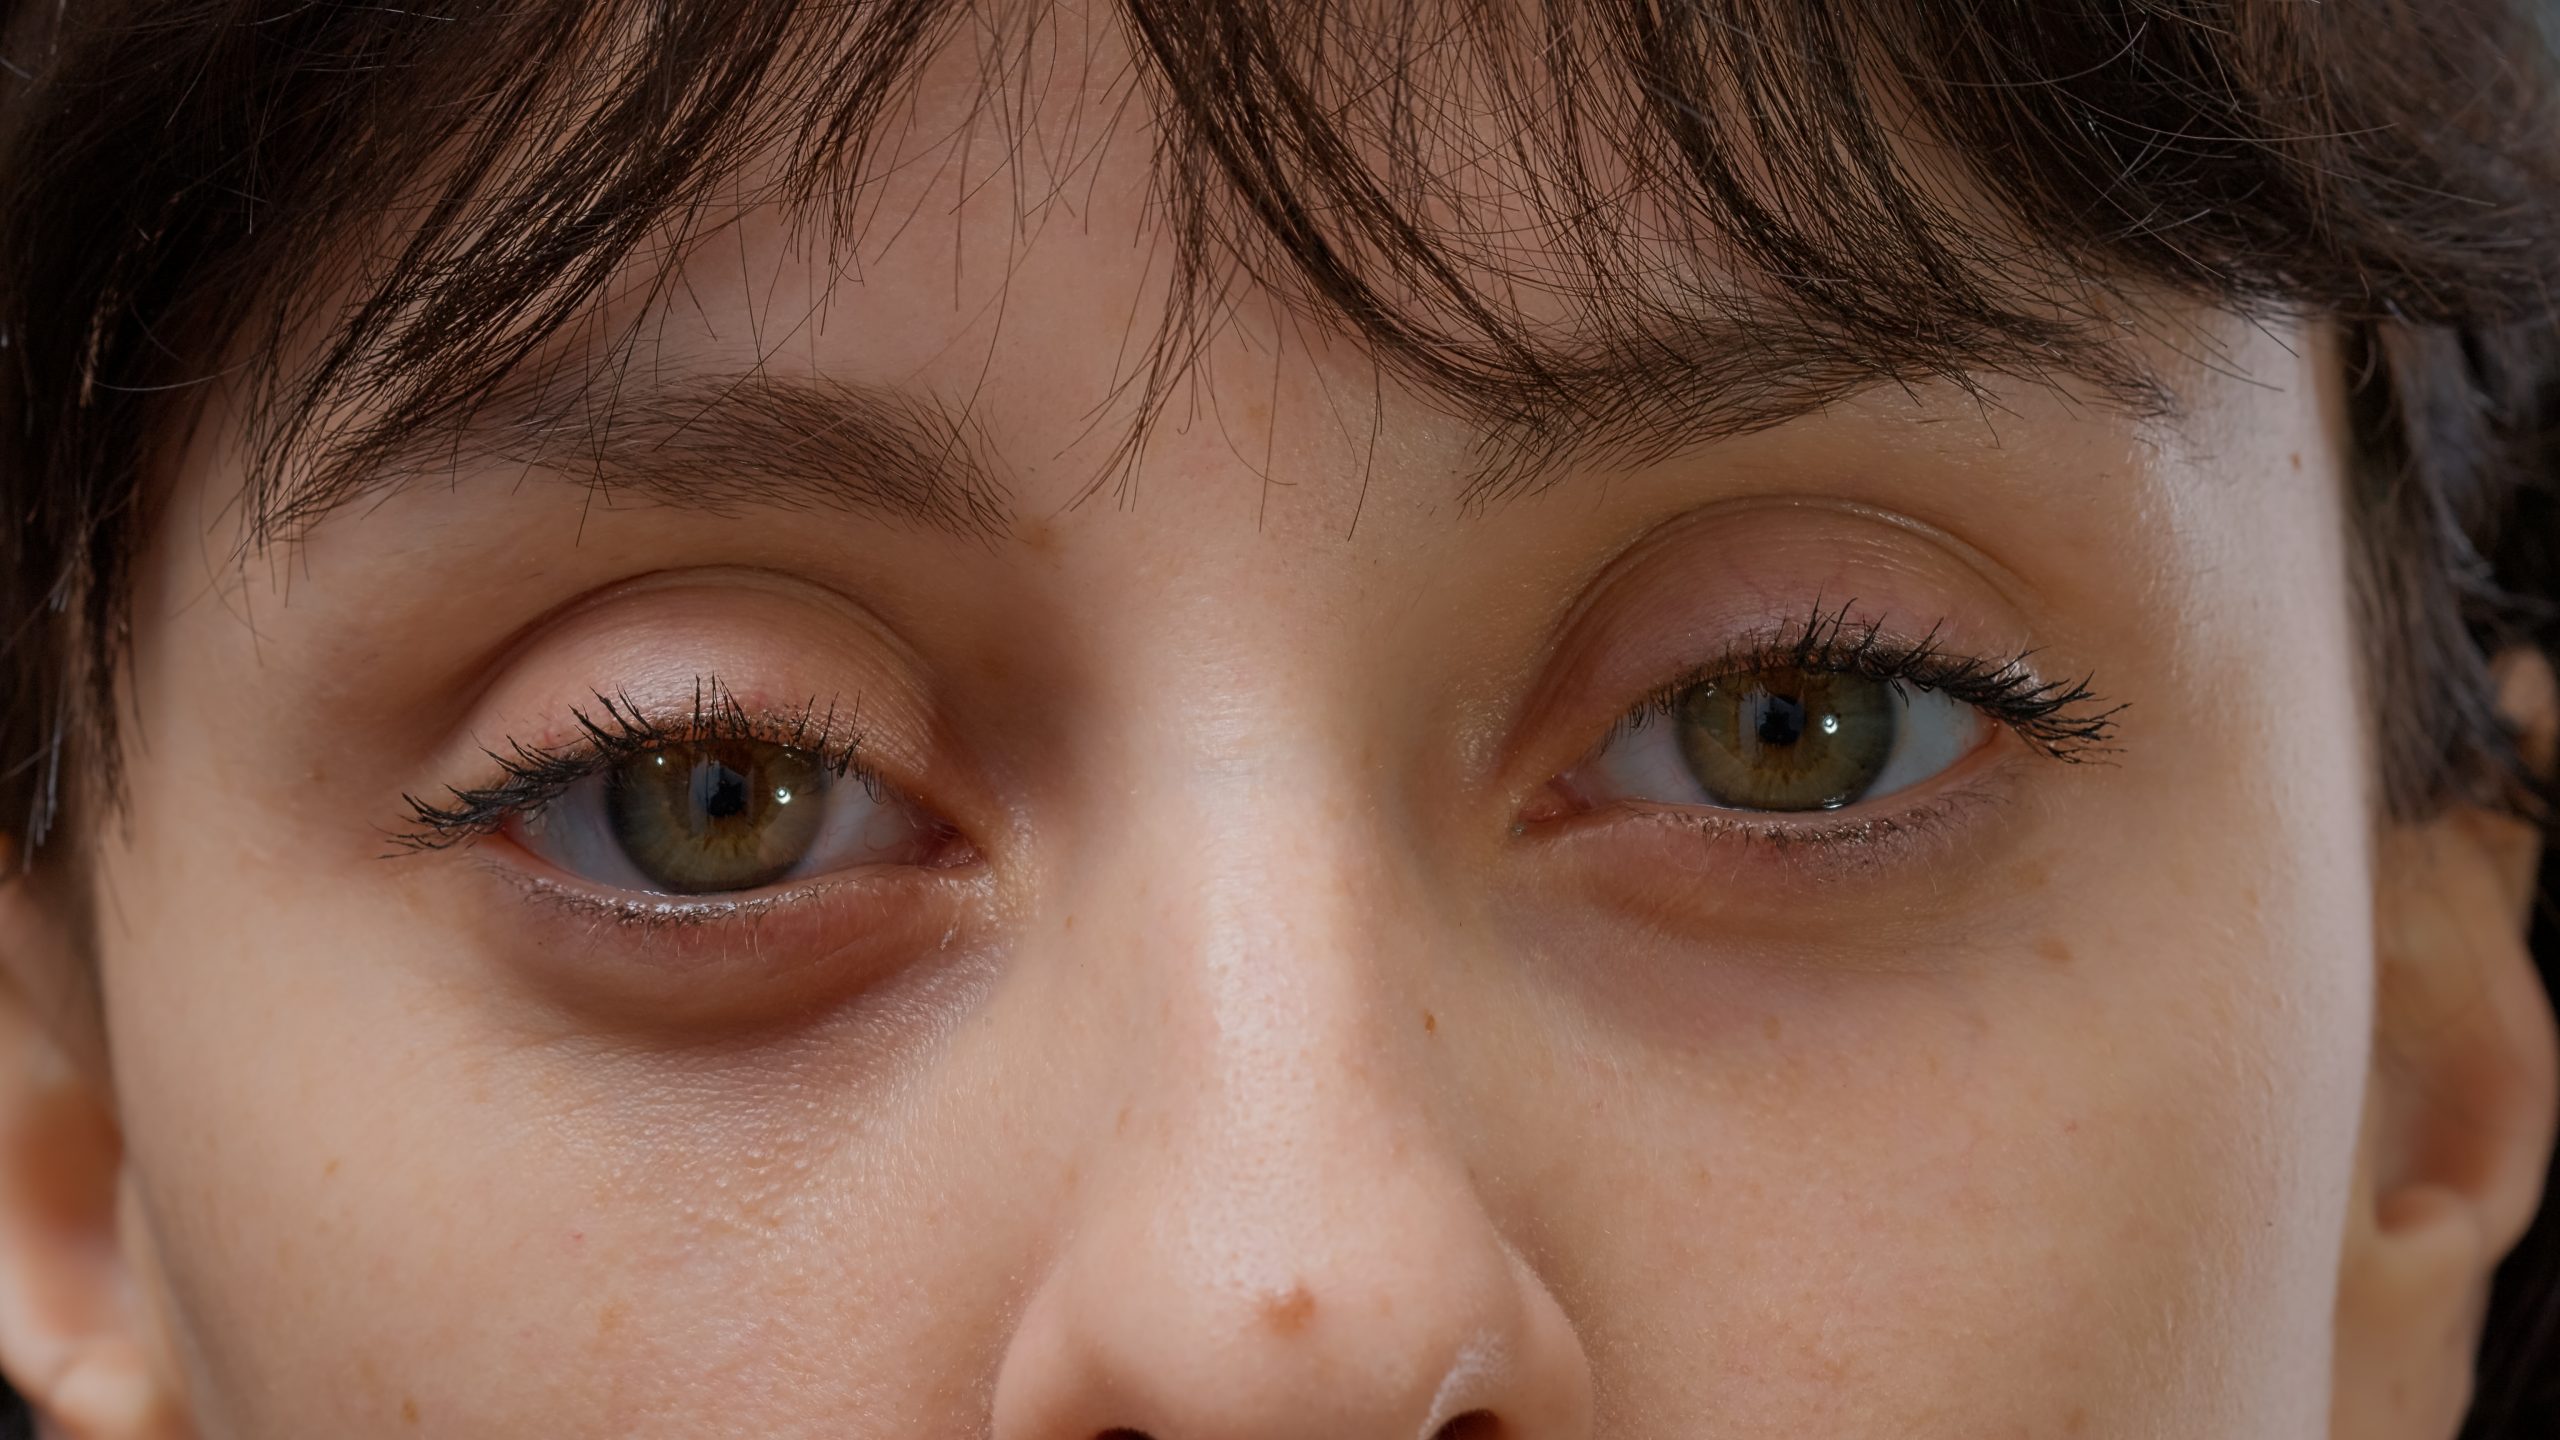 Eyelid Dermatitis A Closer Look at Contact, Symptoms, and Treatment